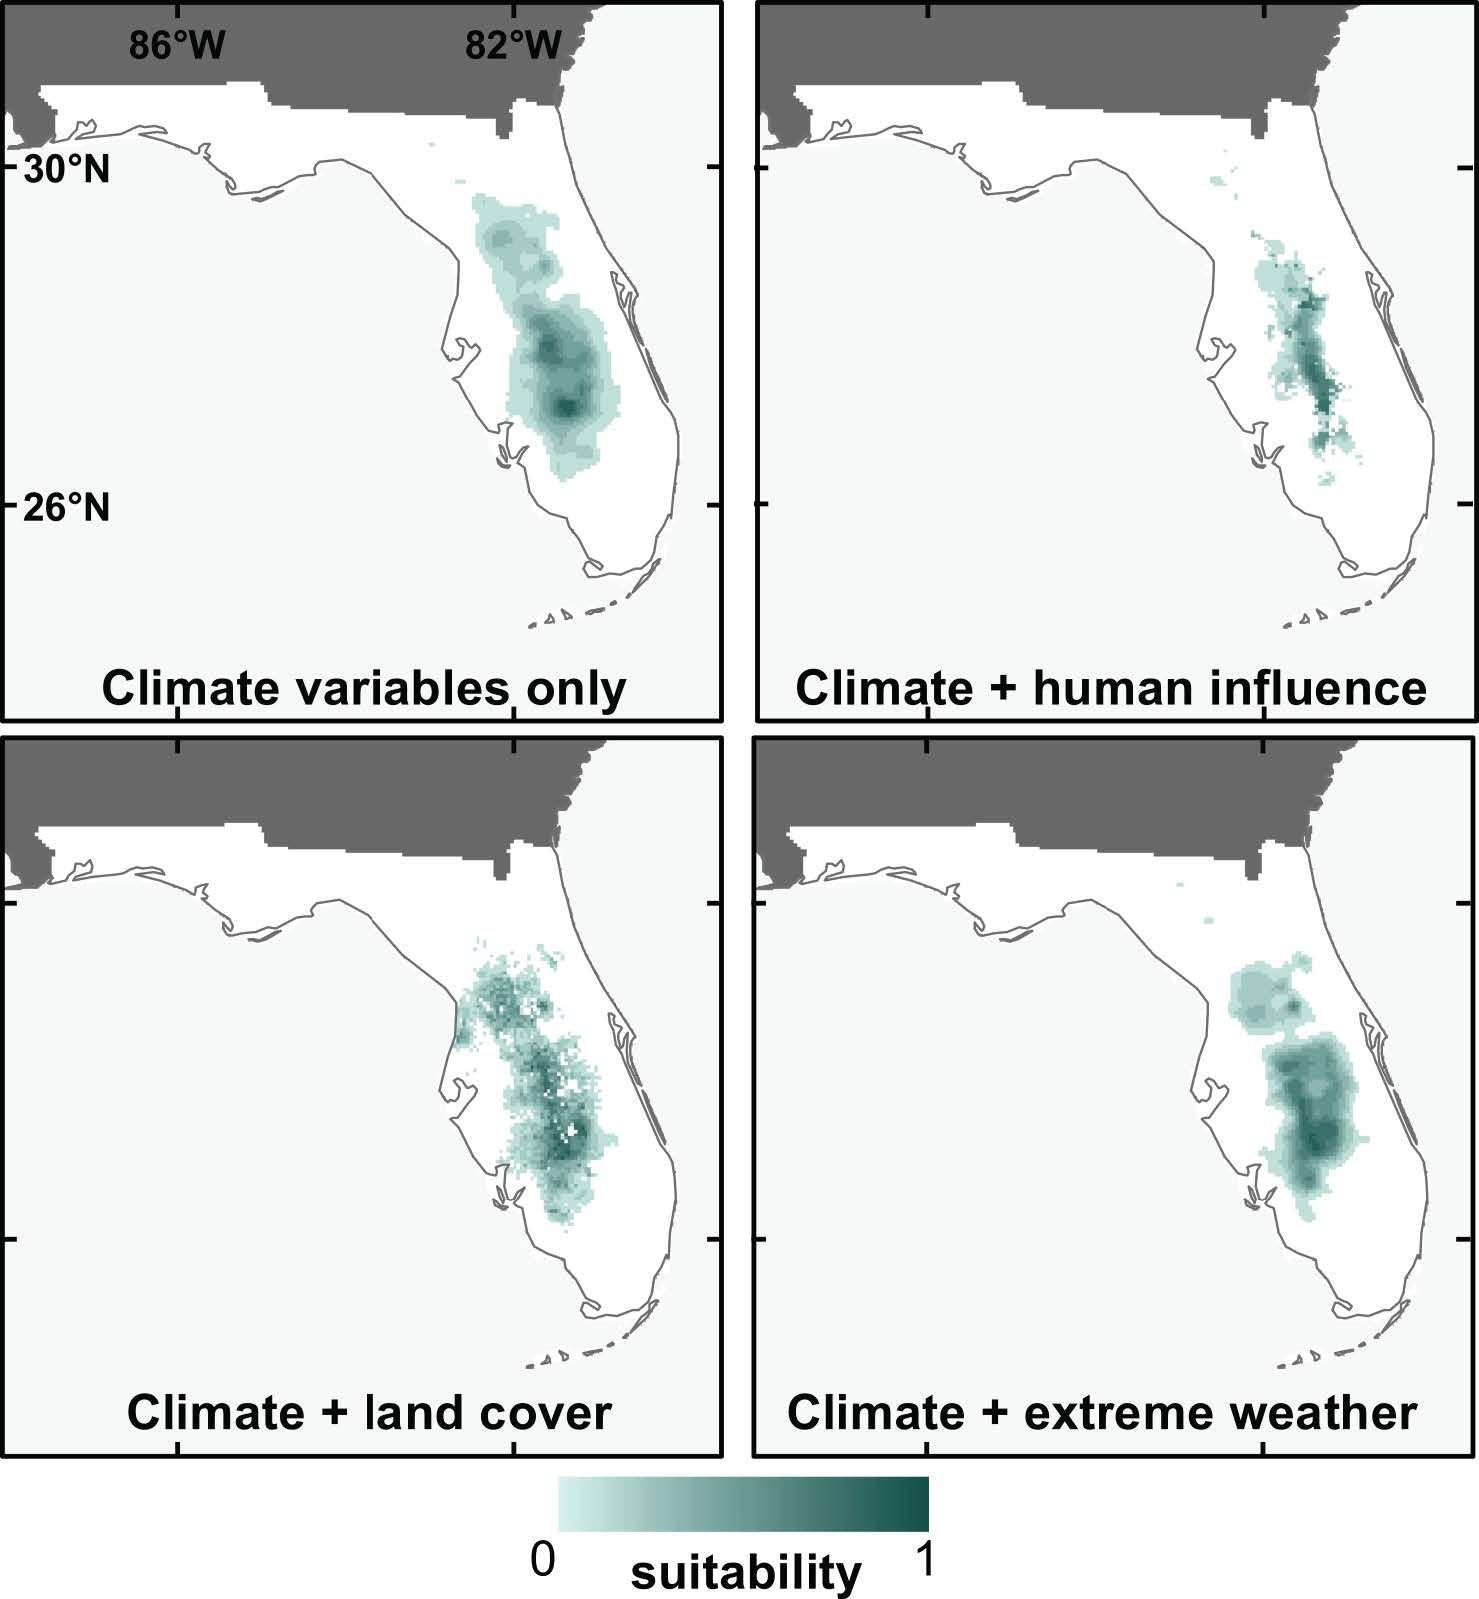 Present time period SDM prediction maps for the Sand skink, using four different sets of input variables. In comparison to the climate variables only map (upper left), note the refined predictions in models including human influence variables (upper right), and to a lesser extent land cover variables (lower left).